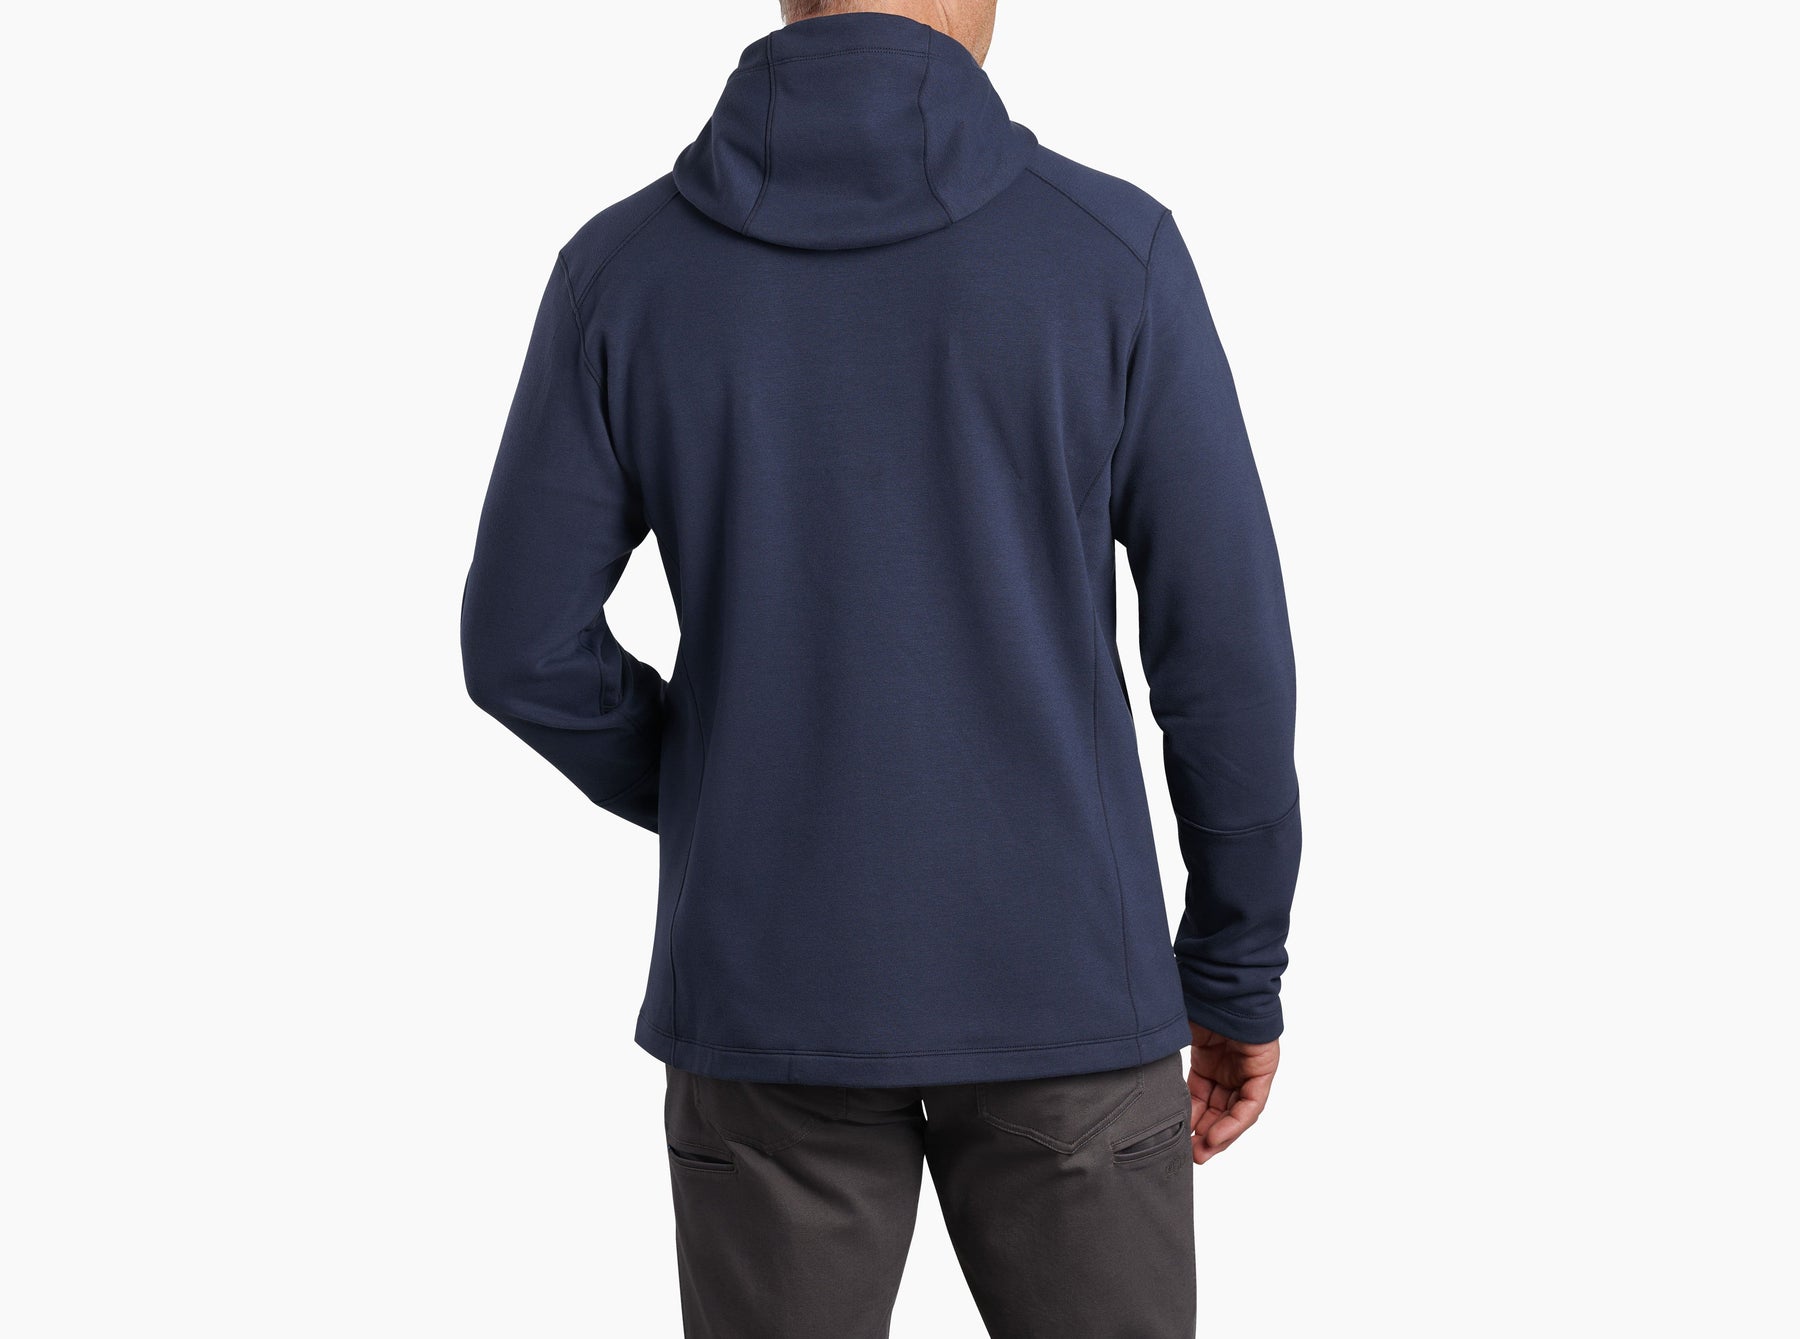 OUTDOOR KUHL Pullover Hoodie for Sale by ROMERROBERTA